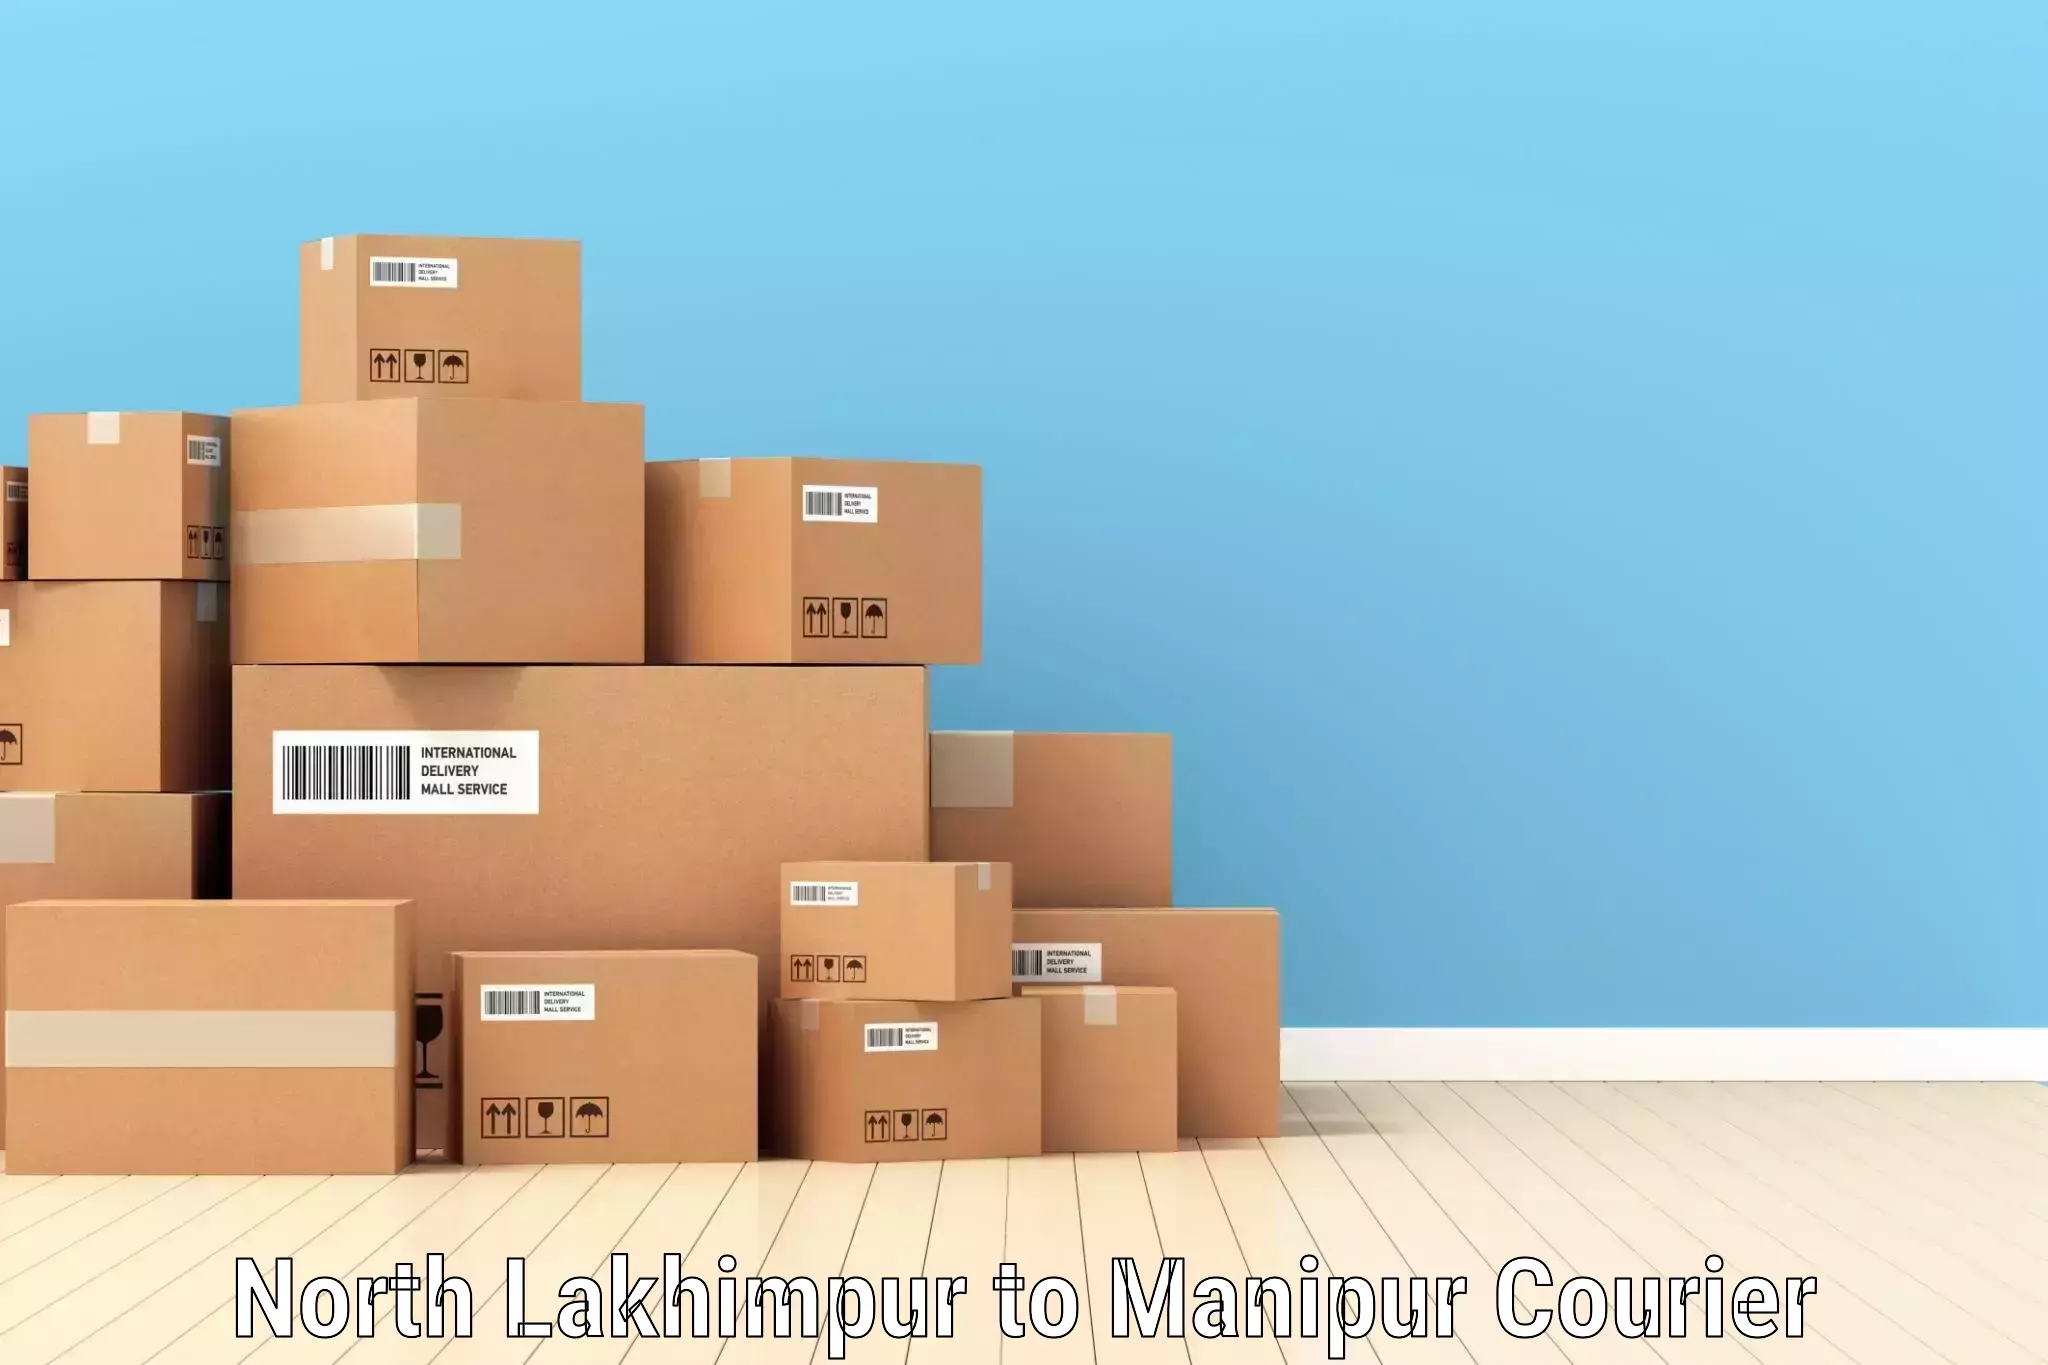 Multi-service courier options North Lakhimpur to Moirang